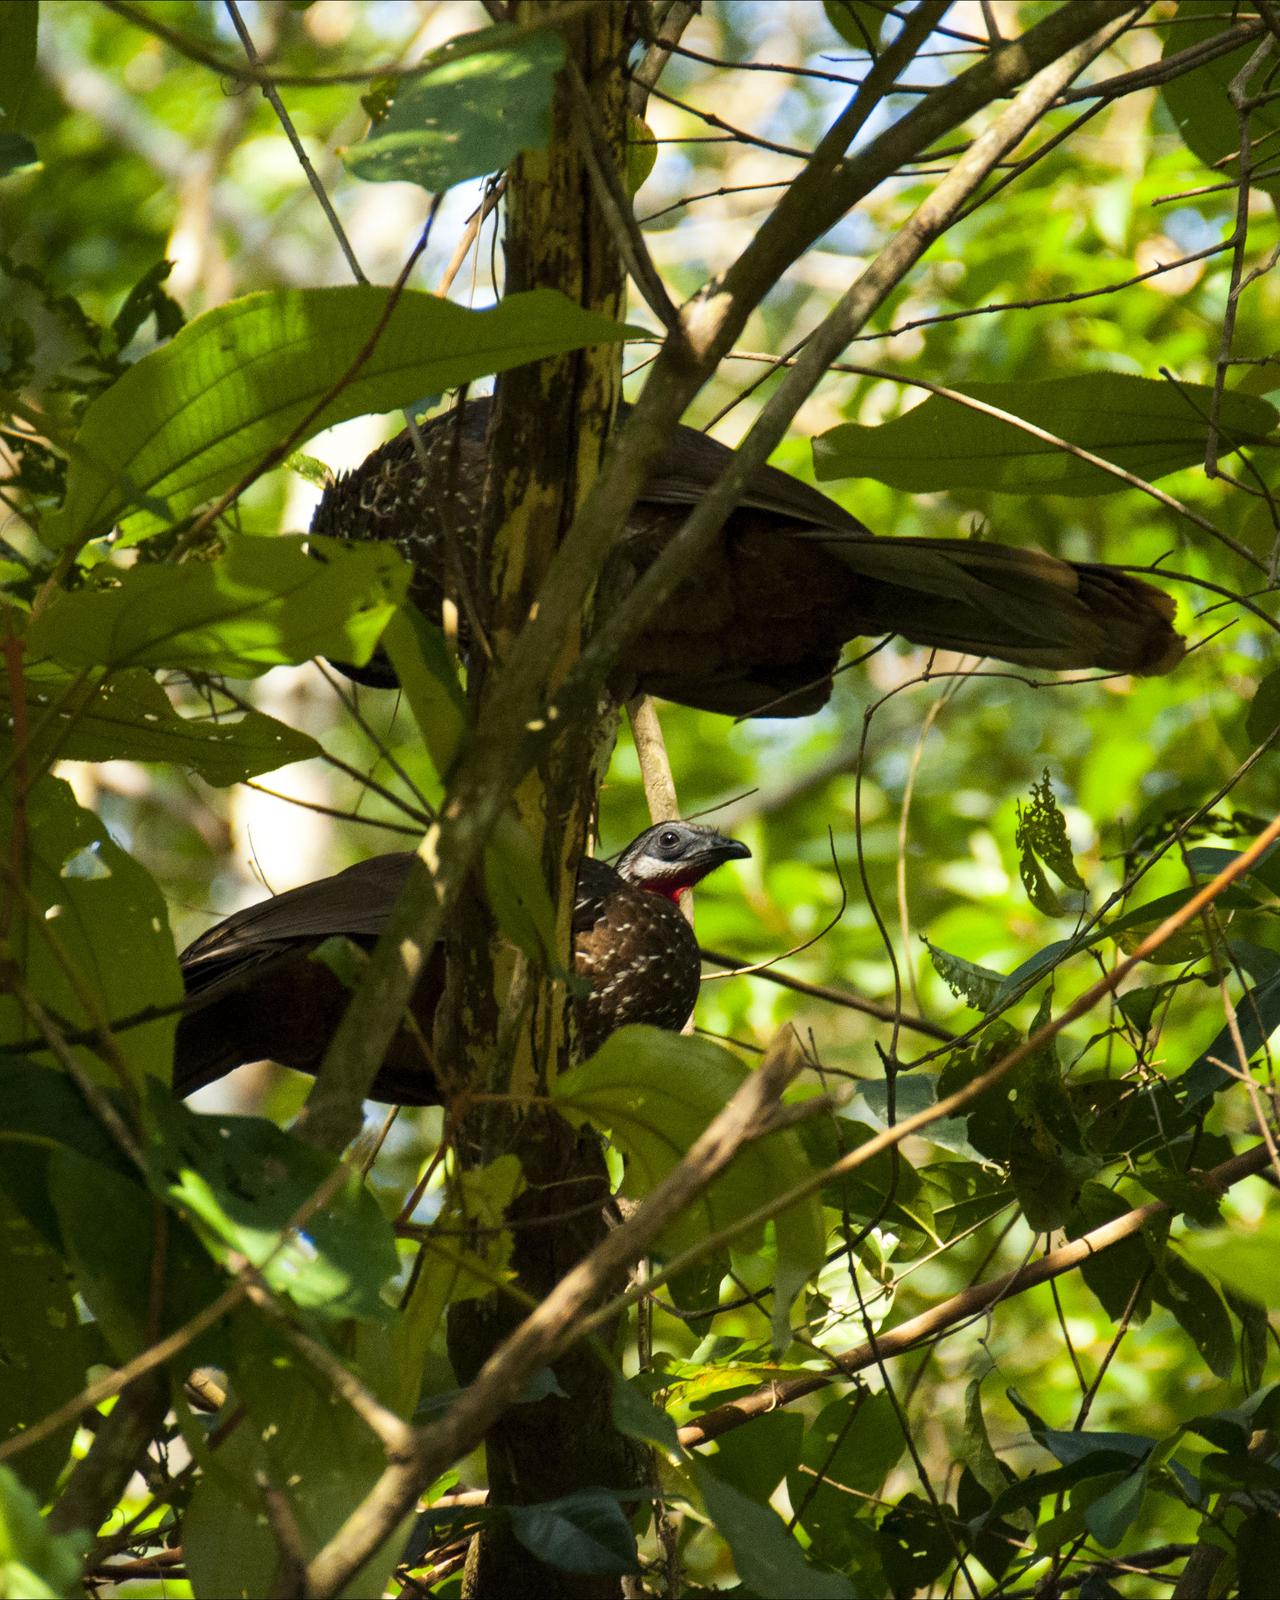 Band-tailed Guan Photo by Diego